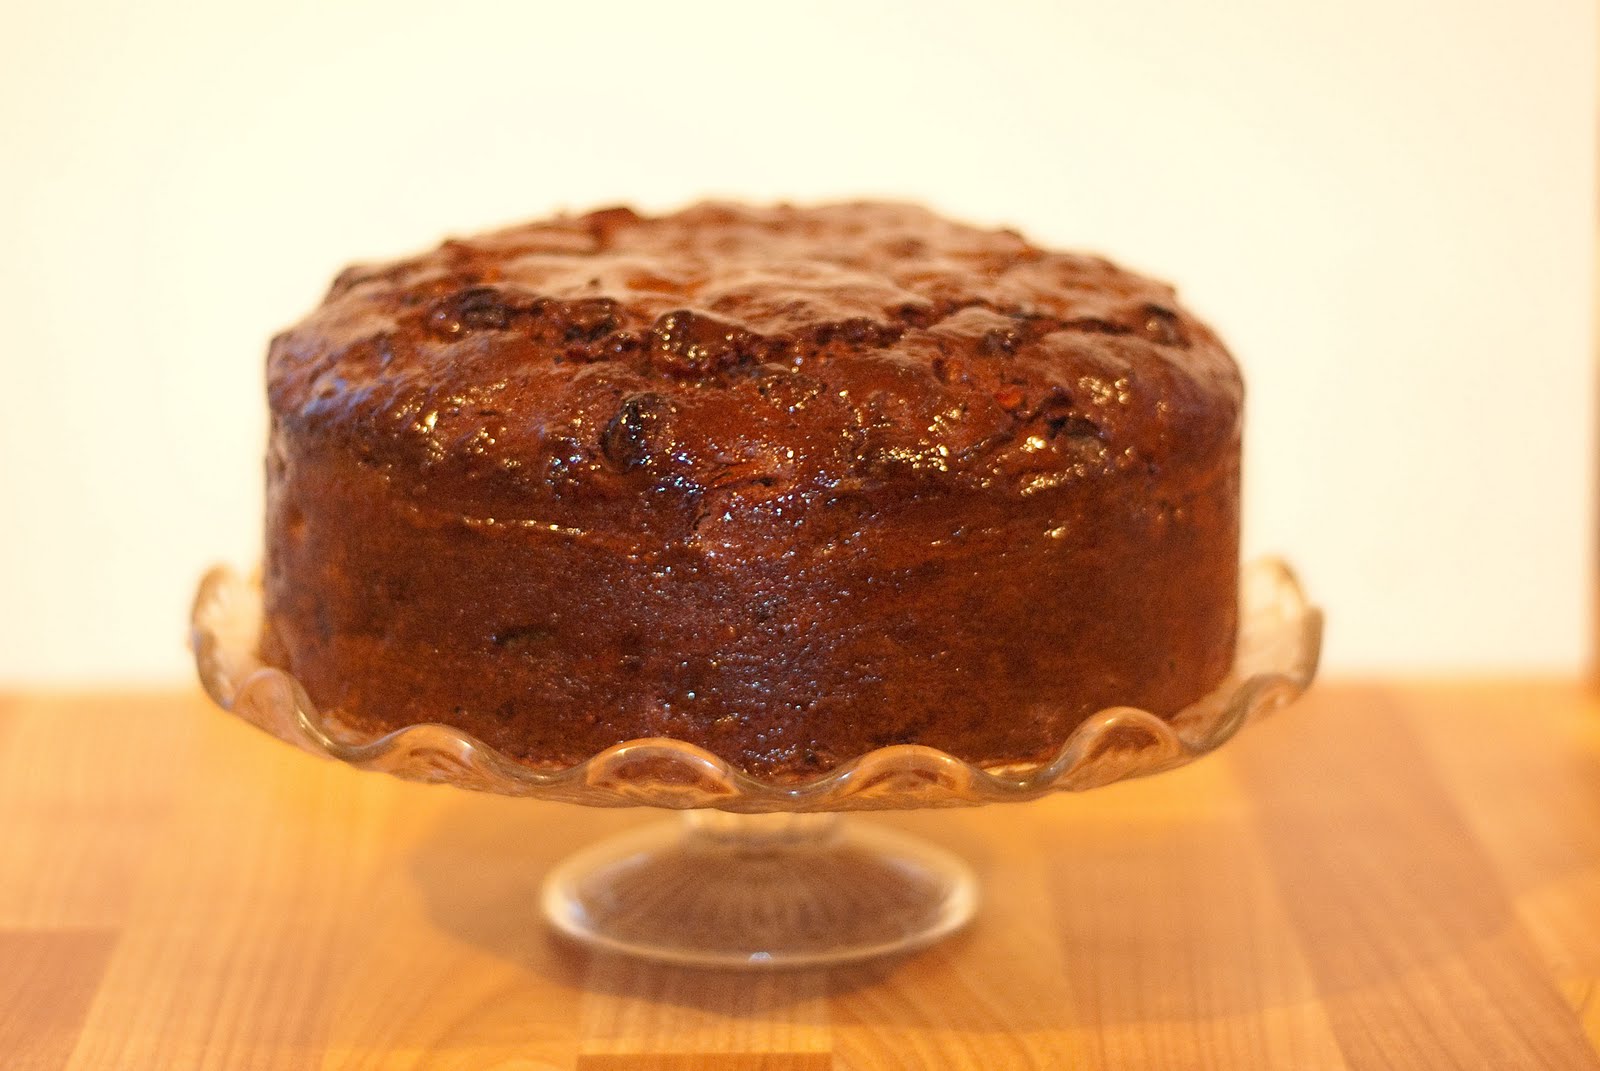 baking obsessively: Boiled fruit cake - an oldie but a goodie